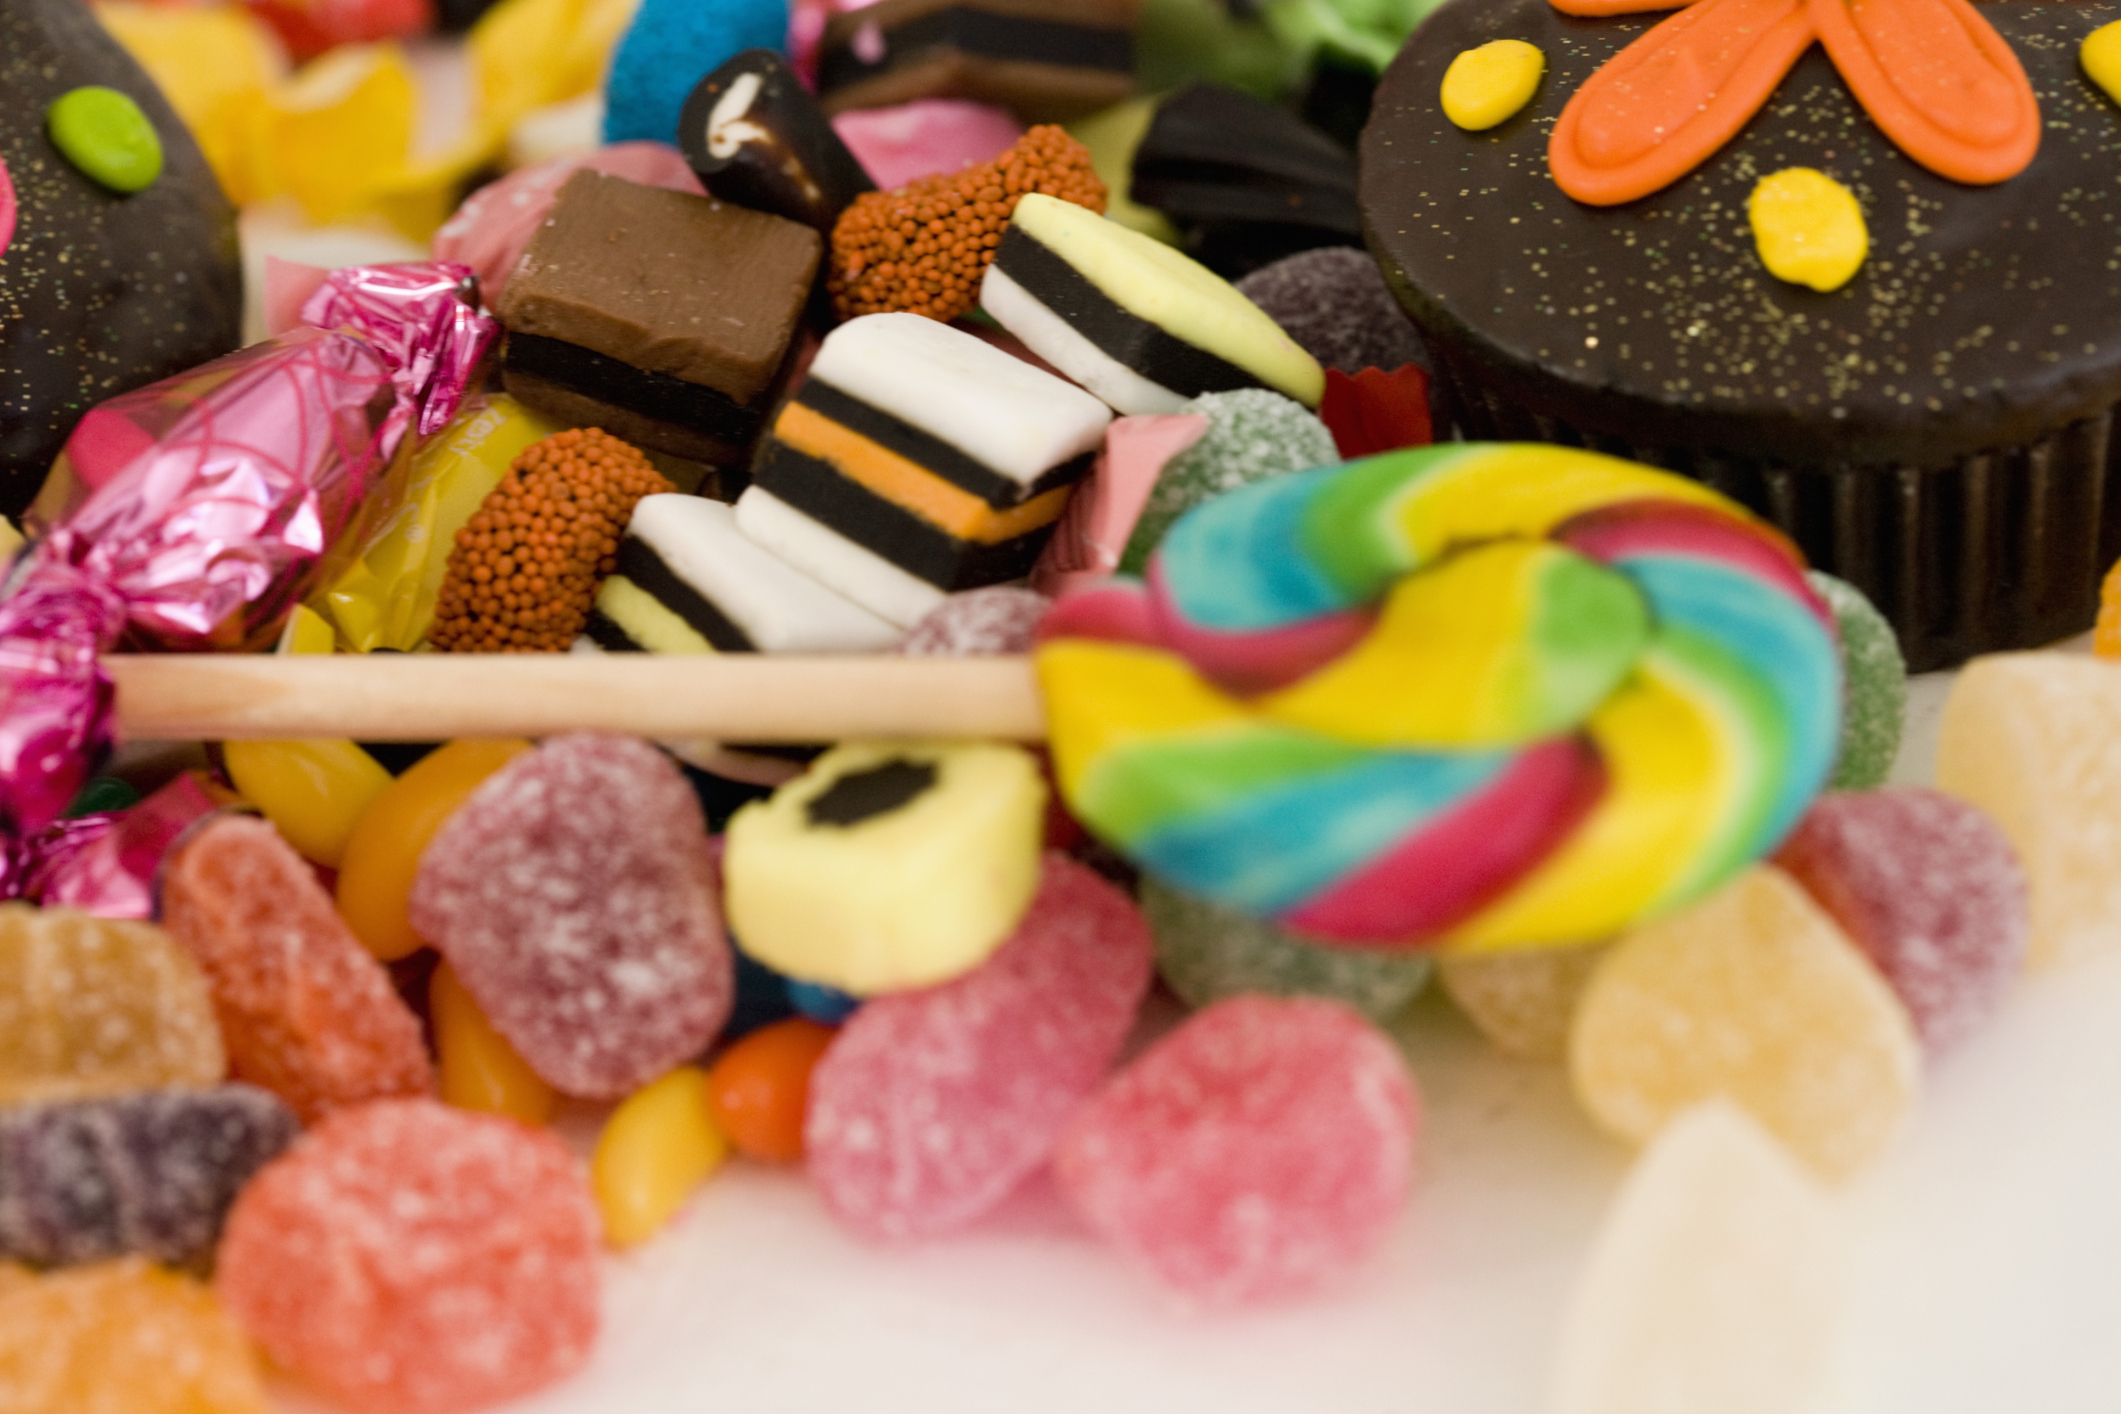 Frugal ideas for leftover Halloween candy